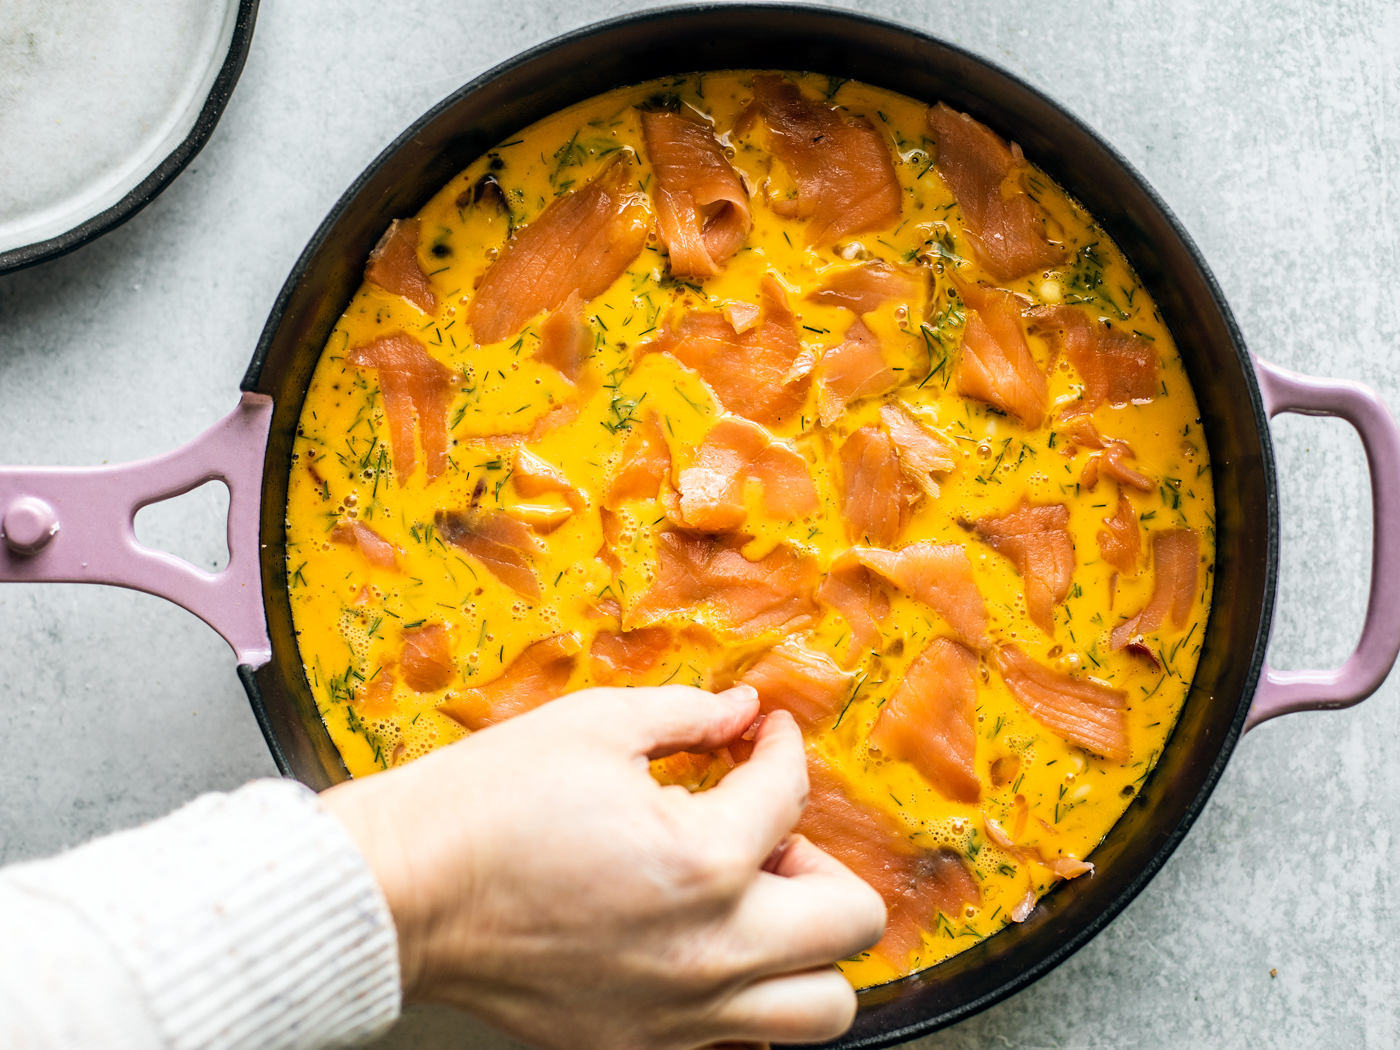 Hand placing piece of smoked salmon into egg mixture in skillet.